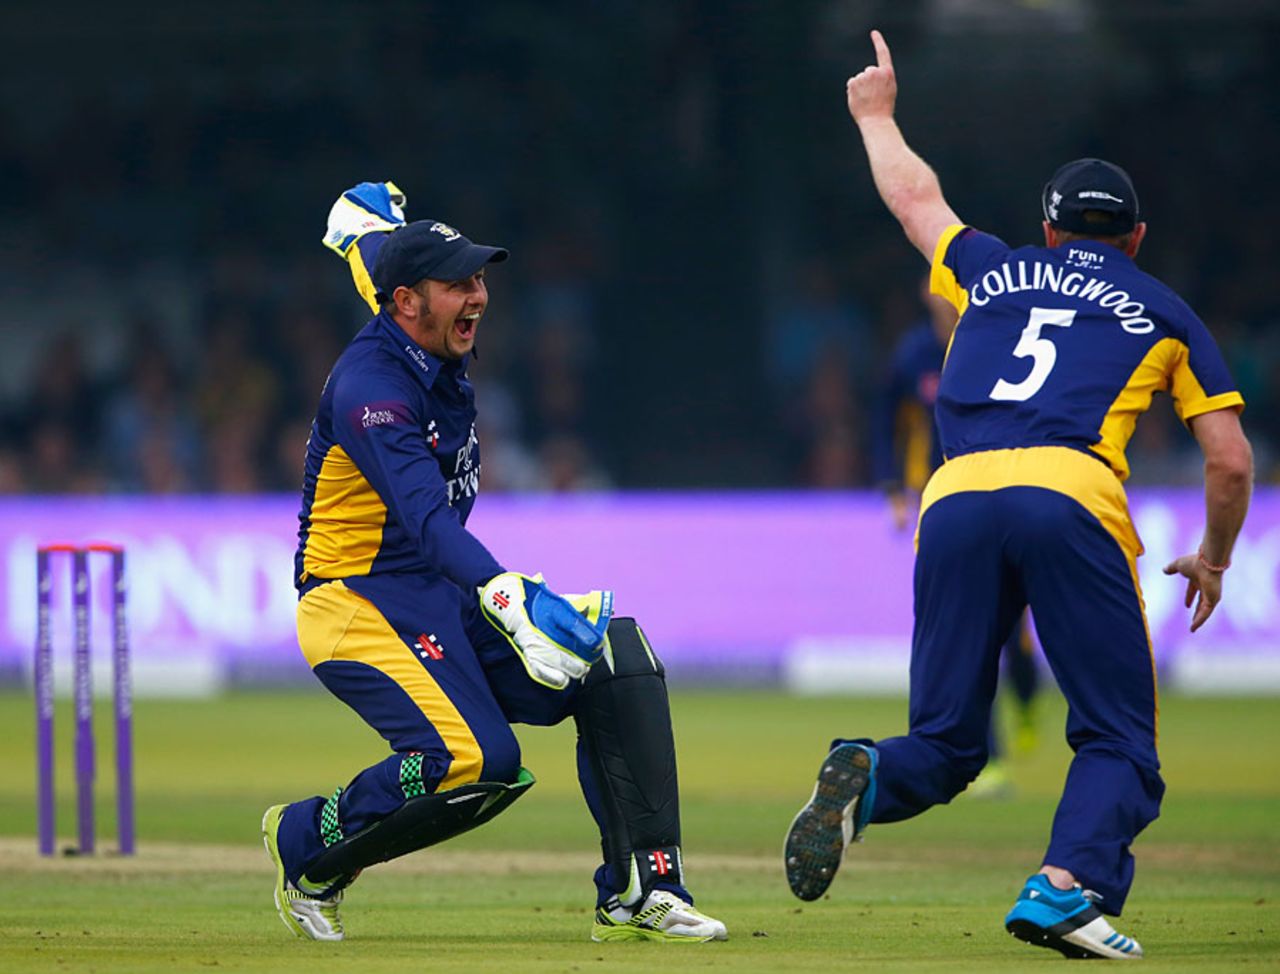 Phil Mustard celebrates his catch to remove Will Porterfield, Durham v Warwickshire, Royal London Cup final, Lord's, September 20, 2014